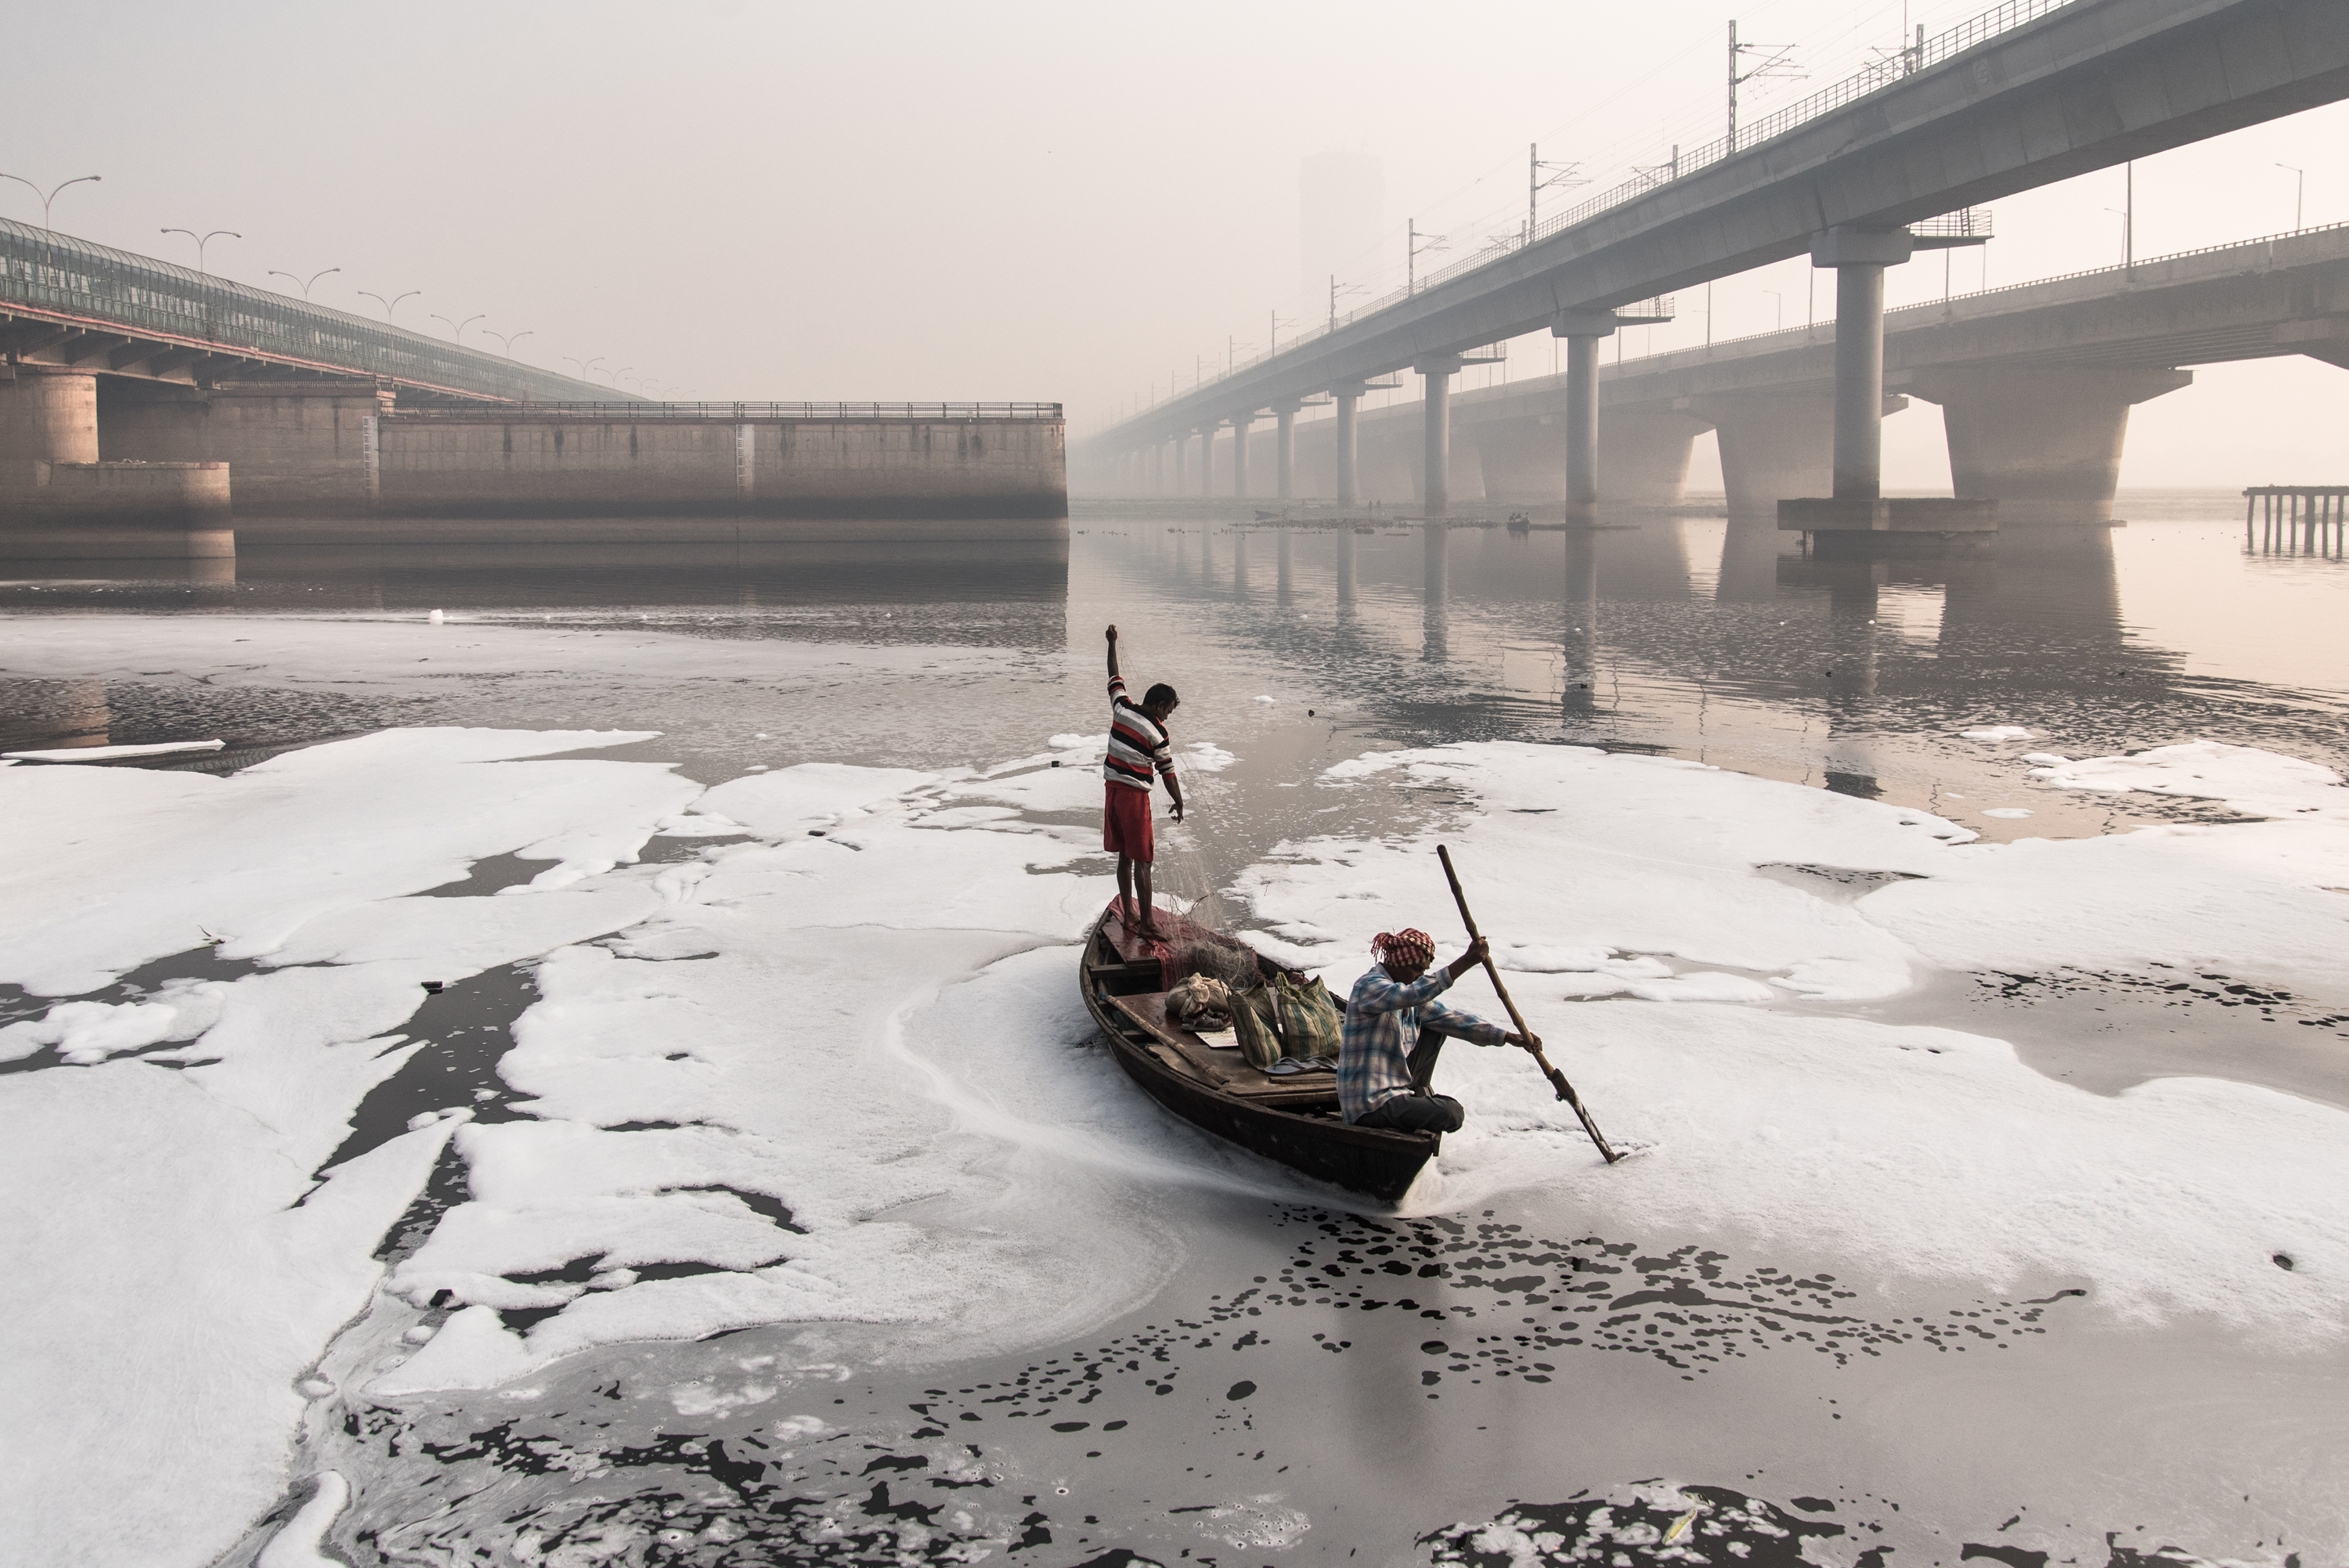 Two men on a boat in polluted New Delhi